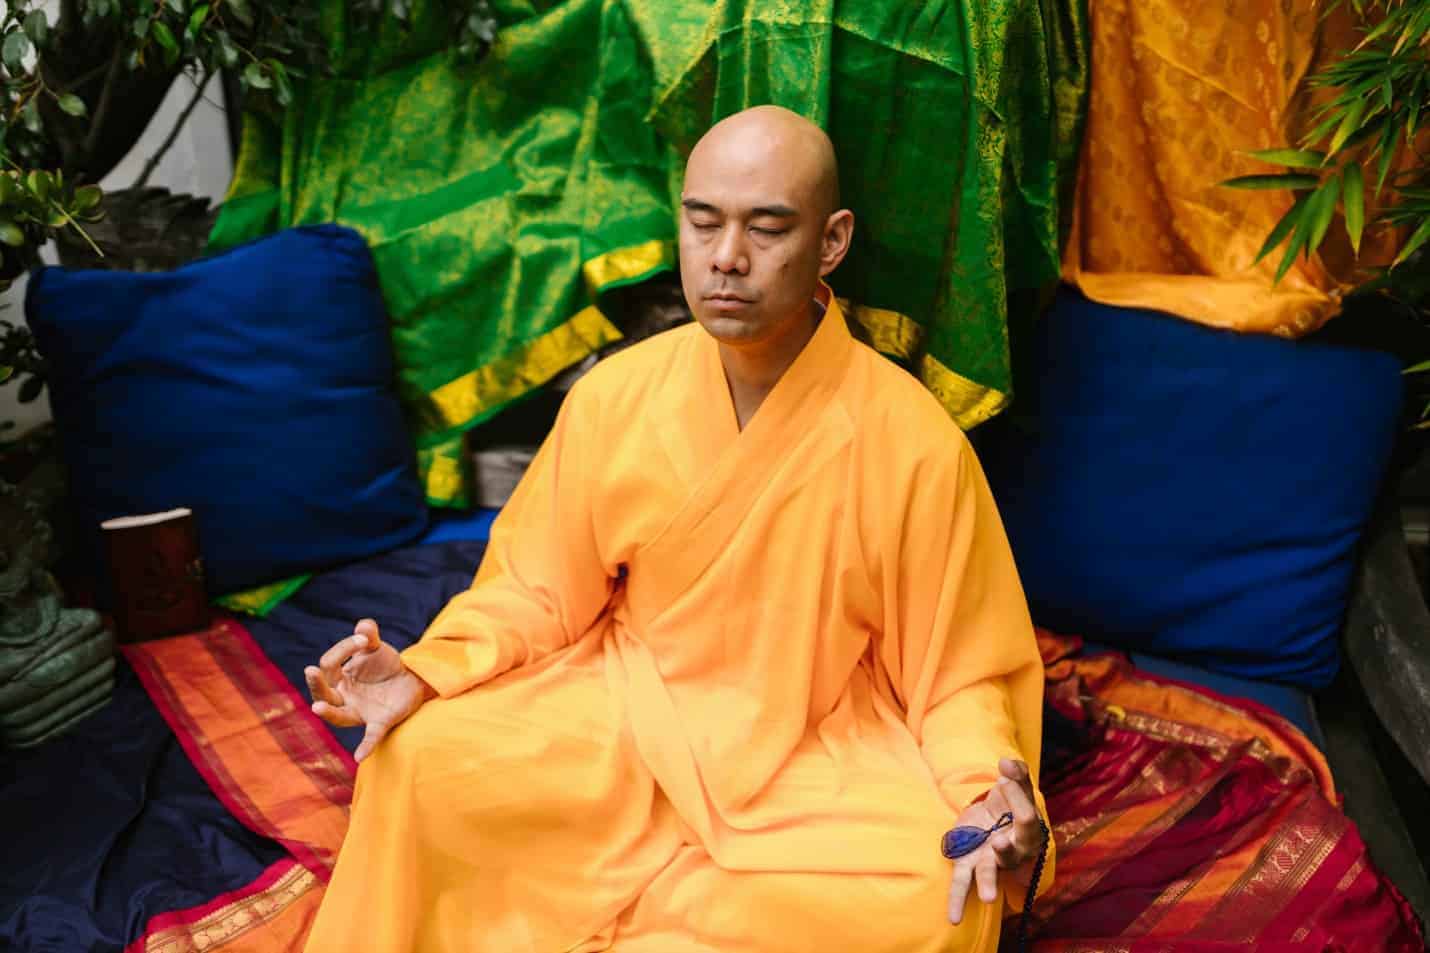 How lengthy should your meditation be?